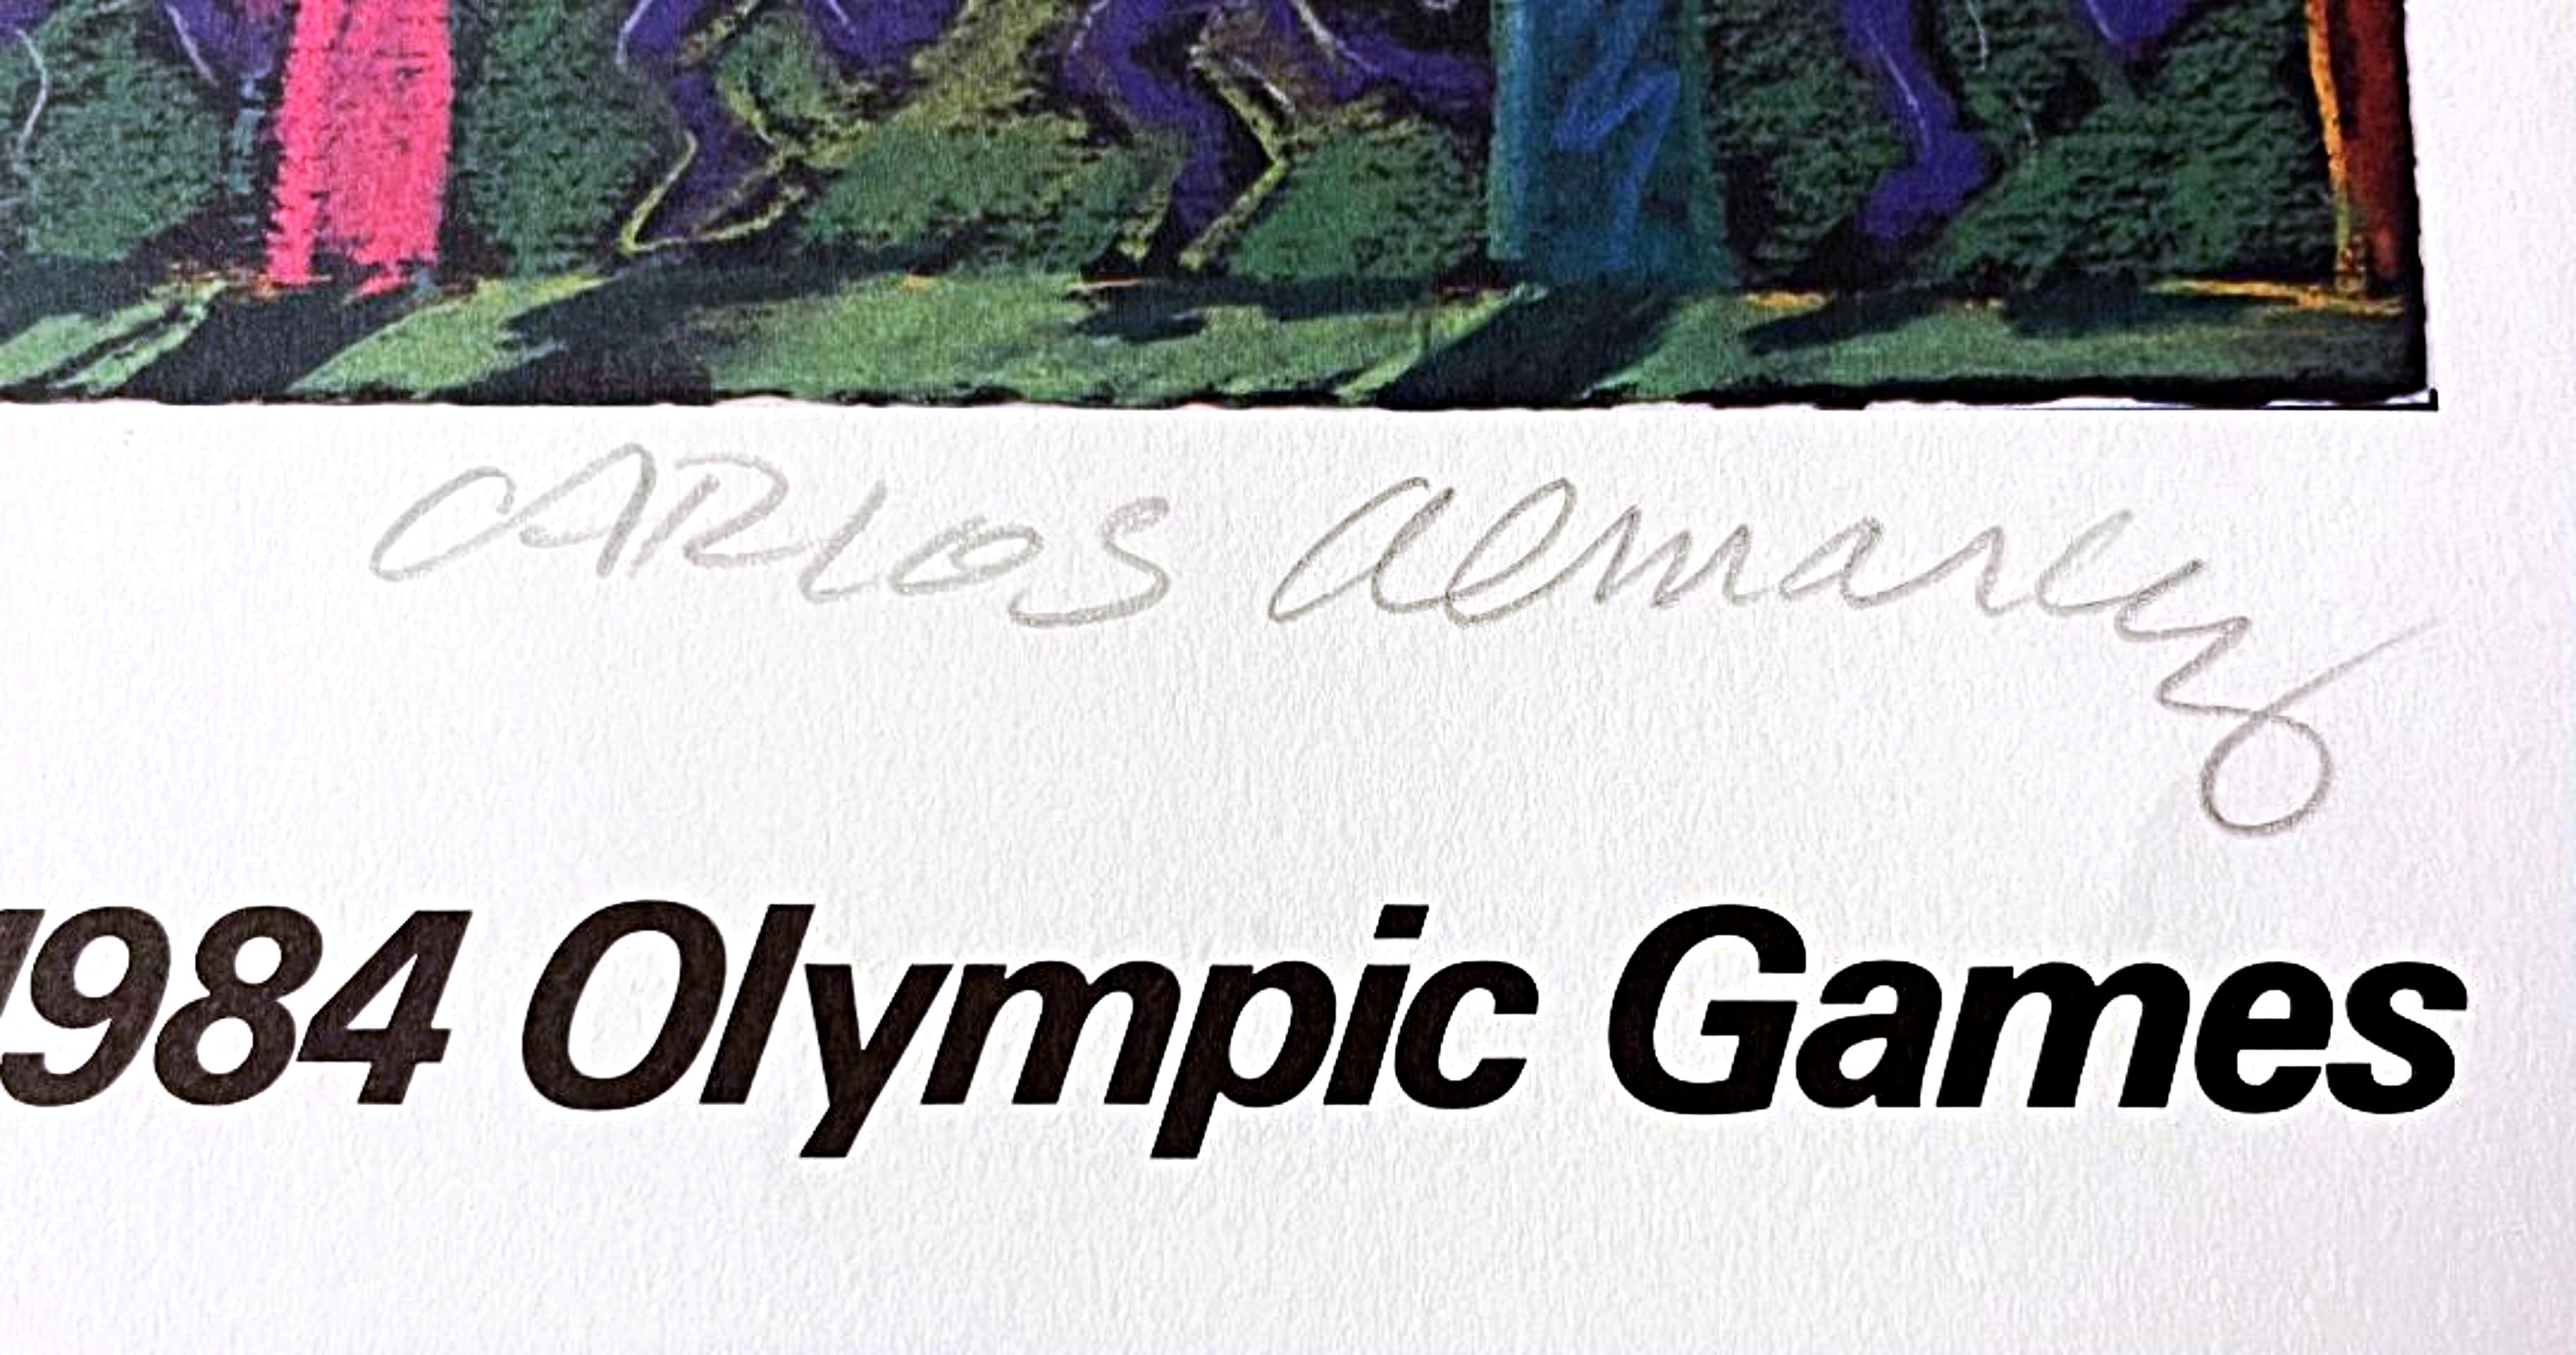 Los Angeles 1984 Olympic Games (with COA from Olympic Committee) - Contemporary Print by Carlos Almaraz